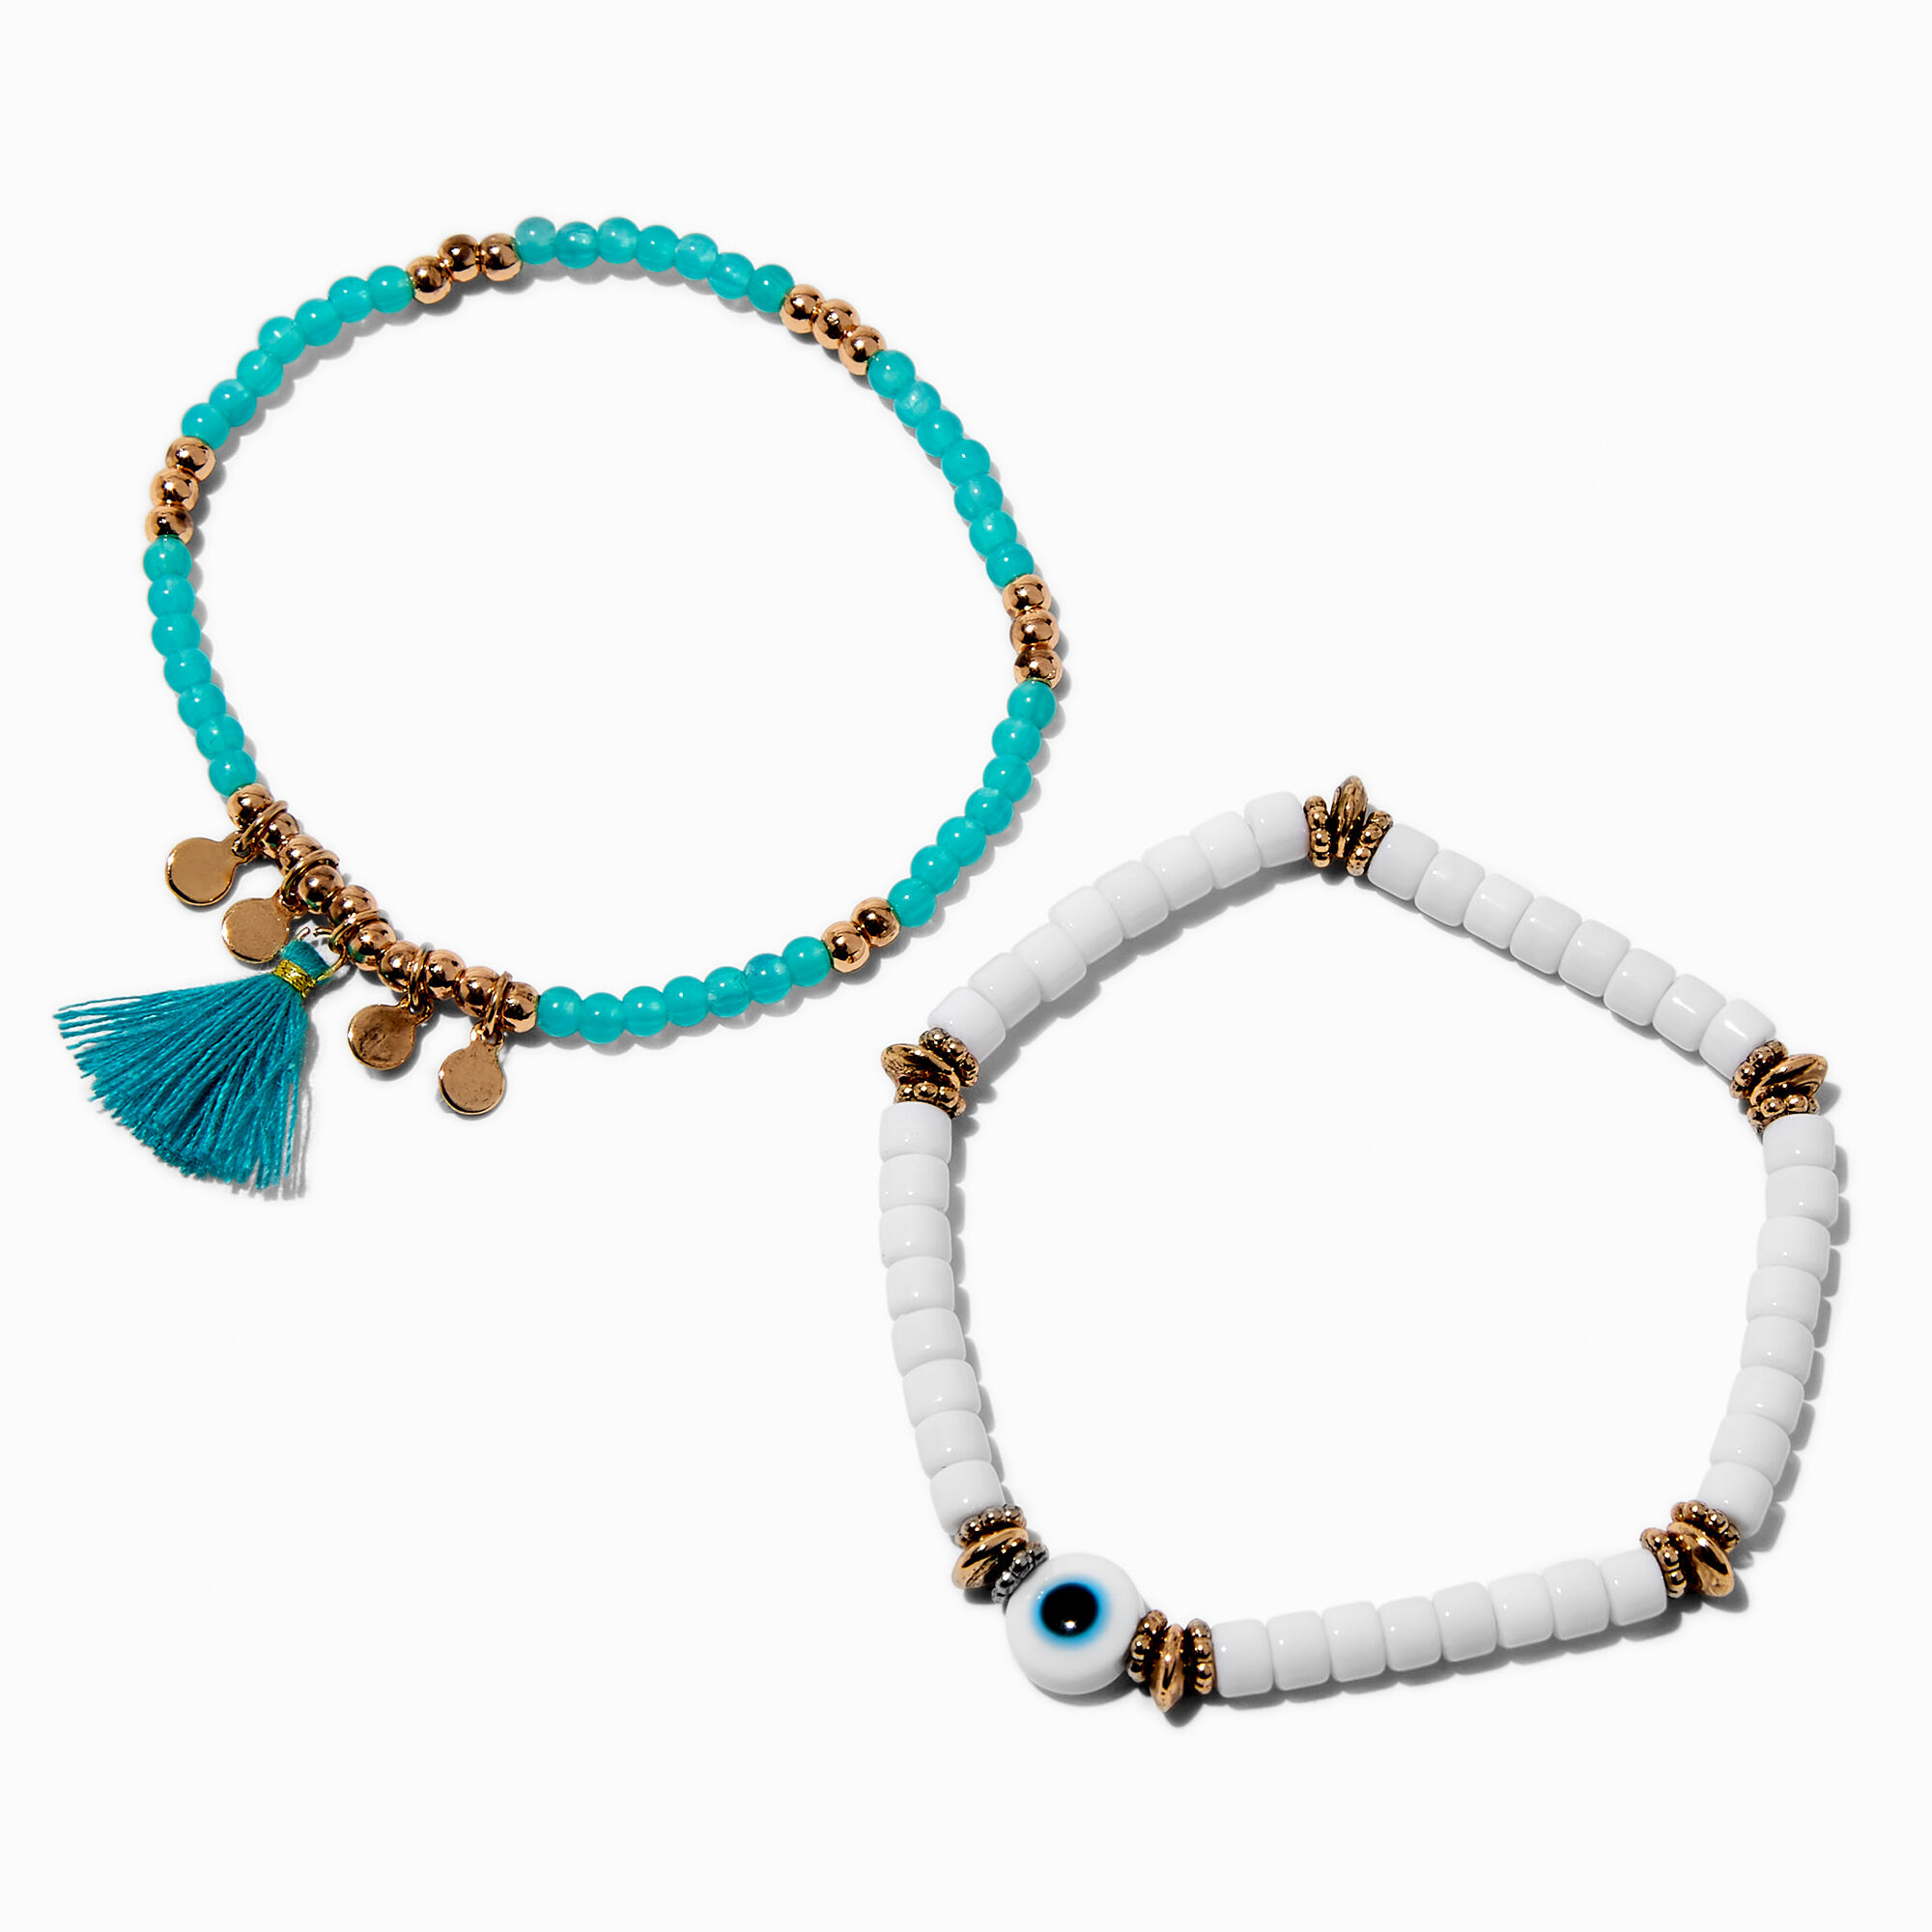 View Claires Tassel Evil Eye Beaded Stretch Bracelet Set 2 Pack Turquoise information